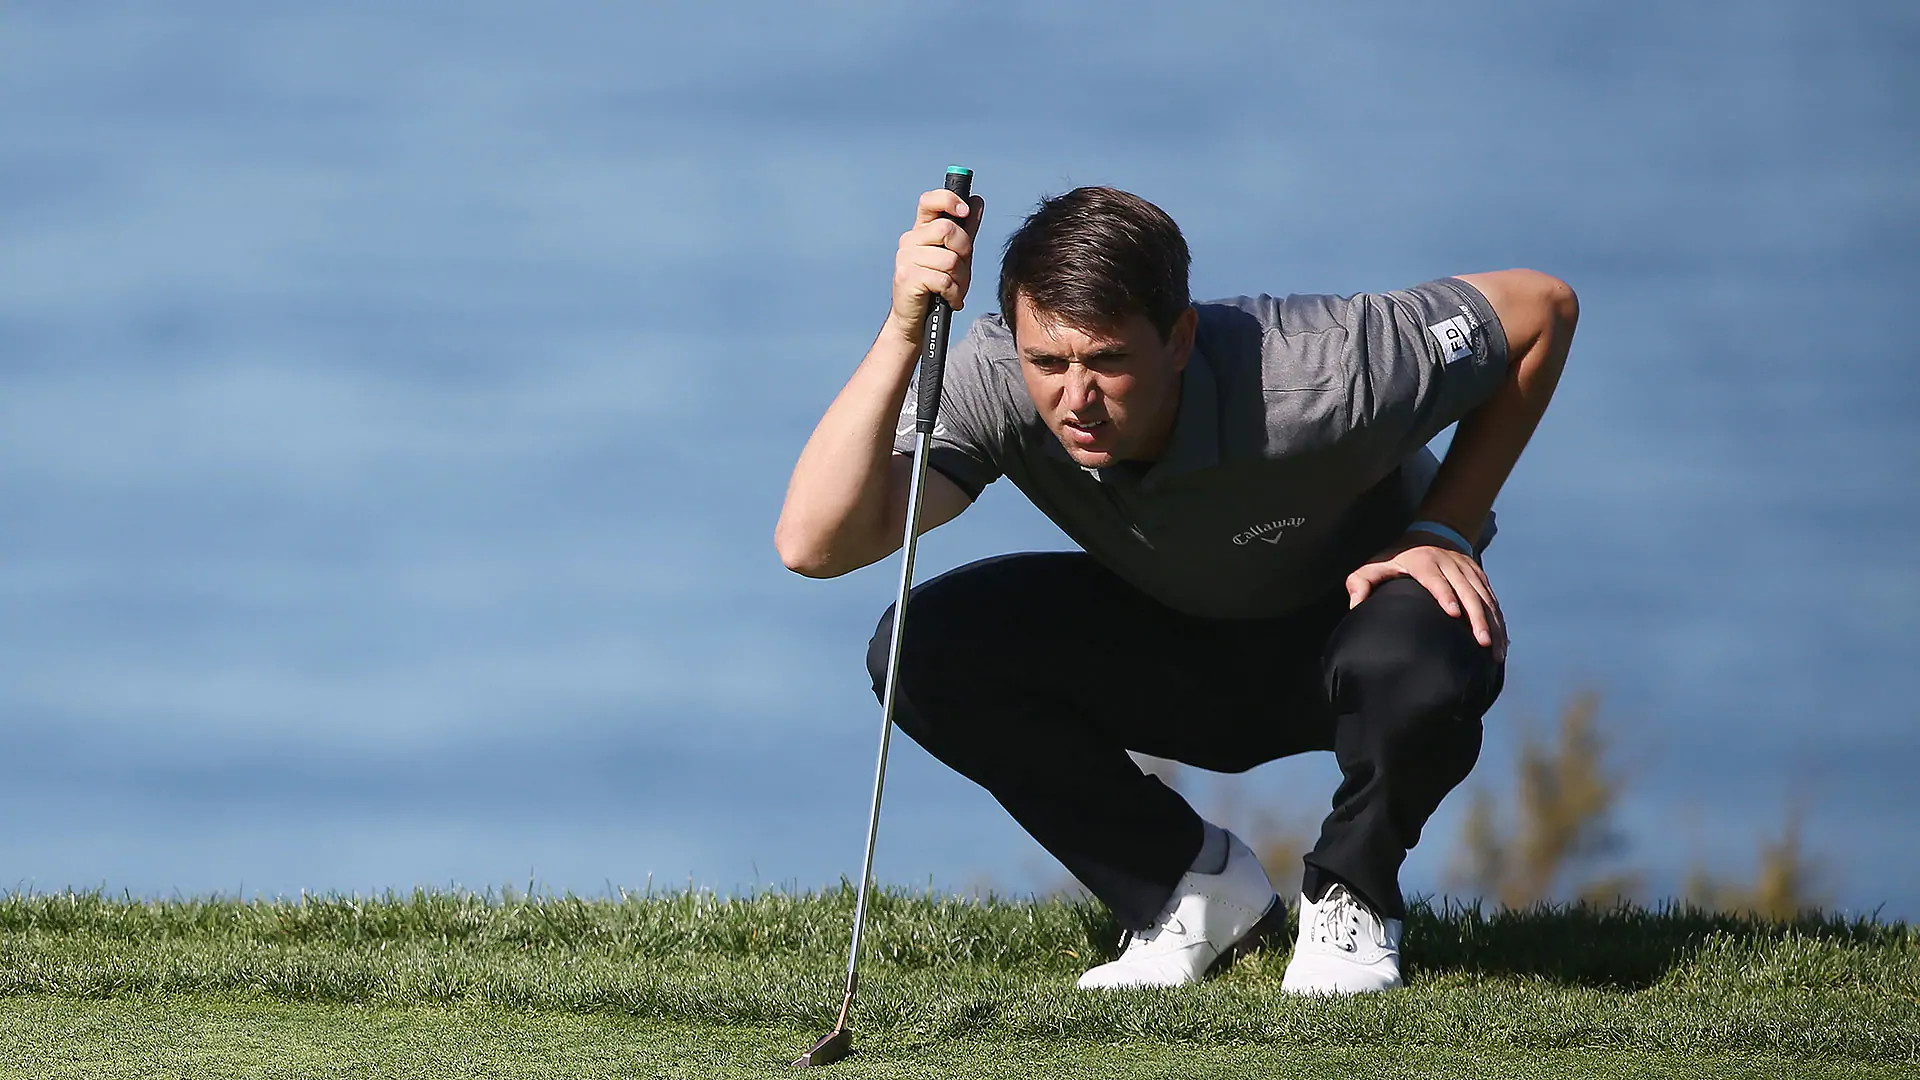 Watch: Schniederjans loses ball at WMPO ... on a putt